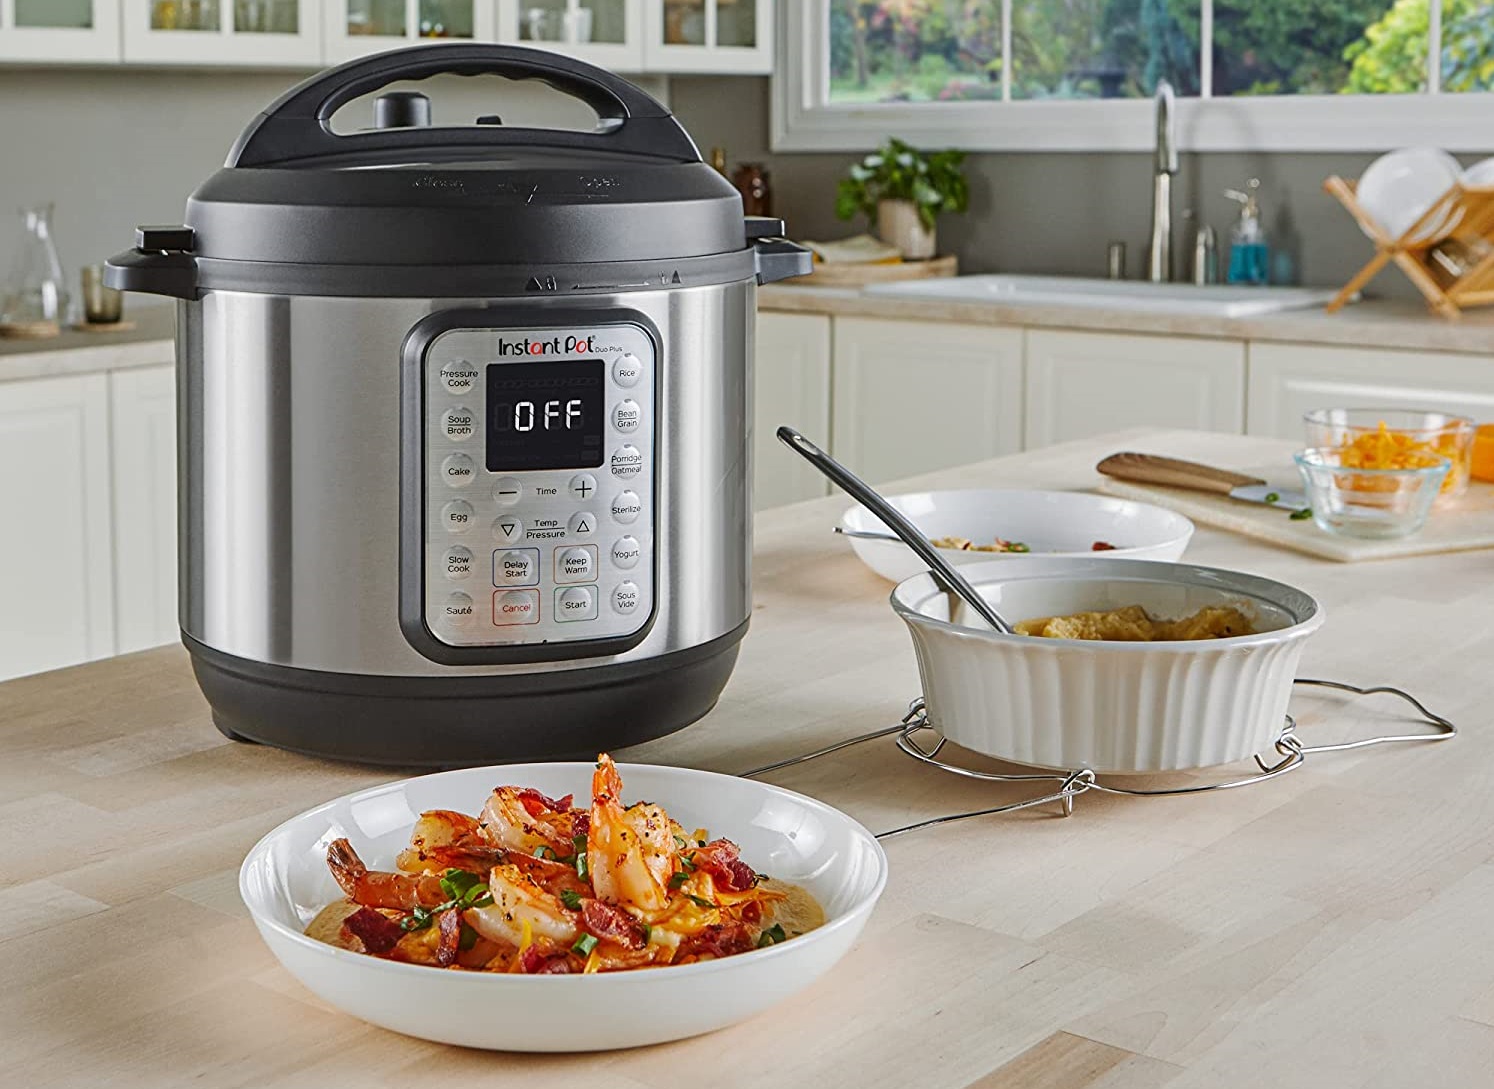 https://www.digitaltrends.com/wp-content/uploads/2021/06/instant-pot-duo-plus-multi-cooker-on-the-counter.jpg?fit=720%2C524&p=1